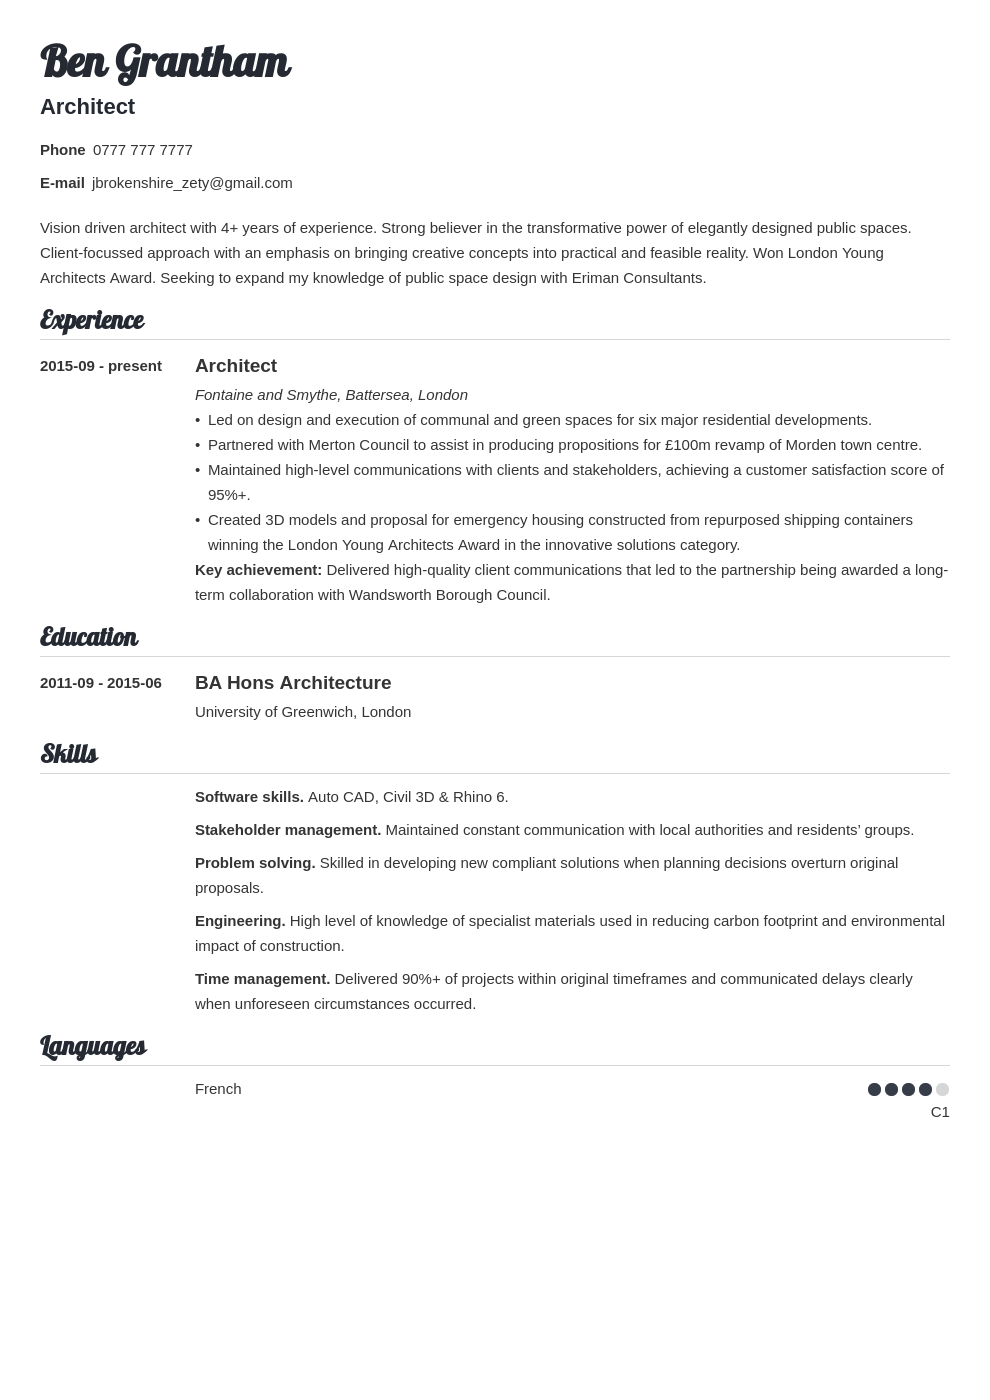 Architecture CV Examples & Template for 2021